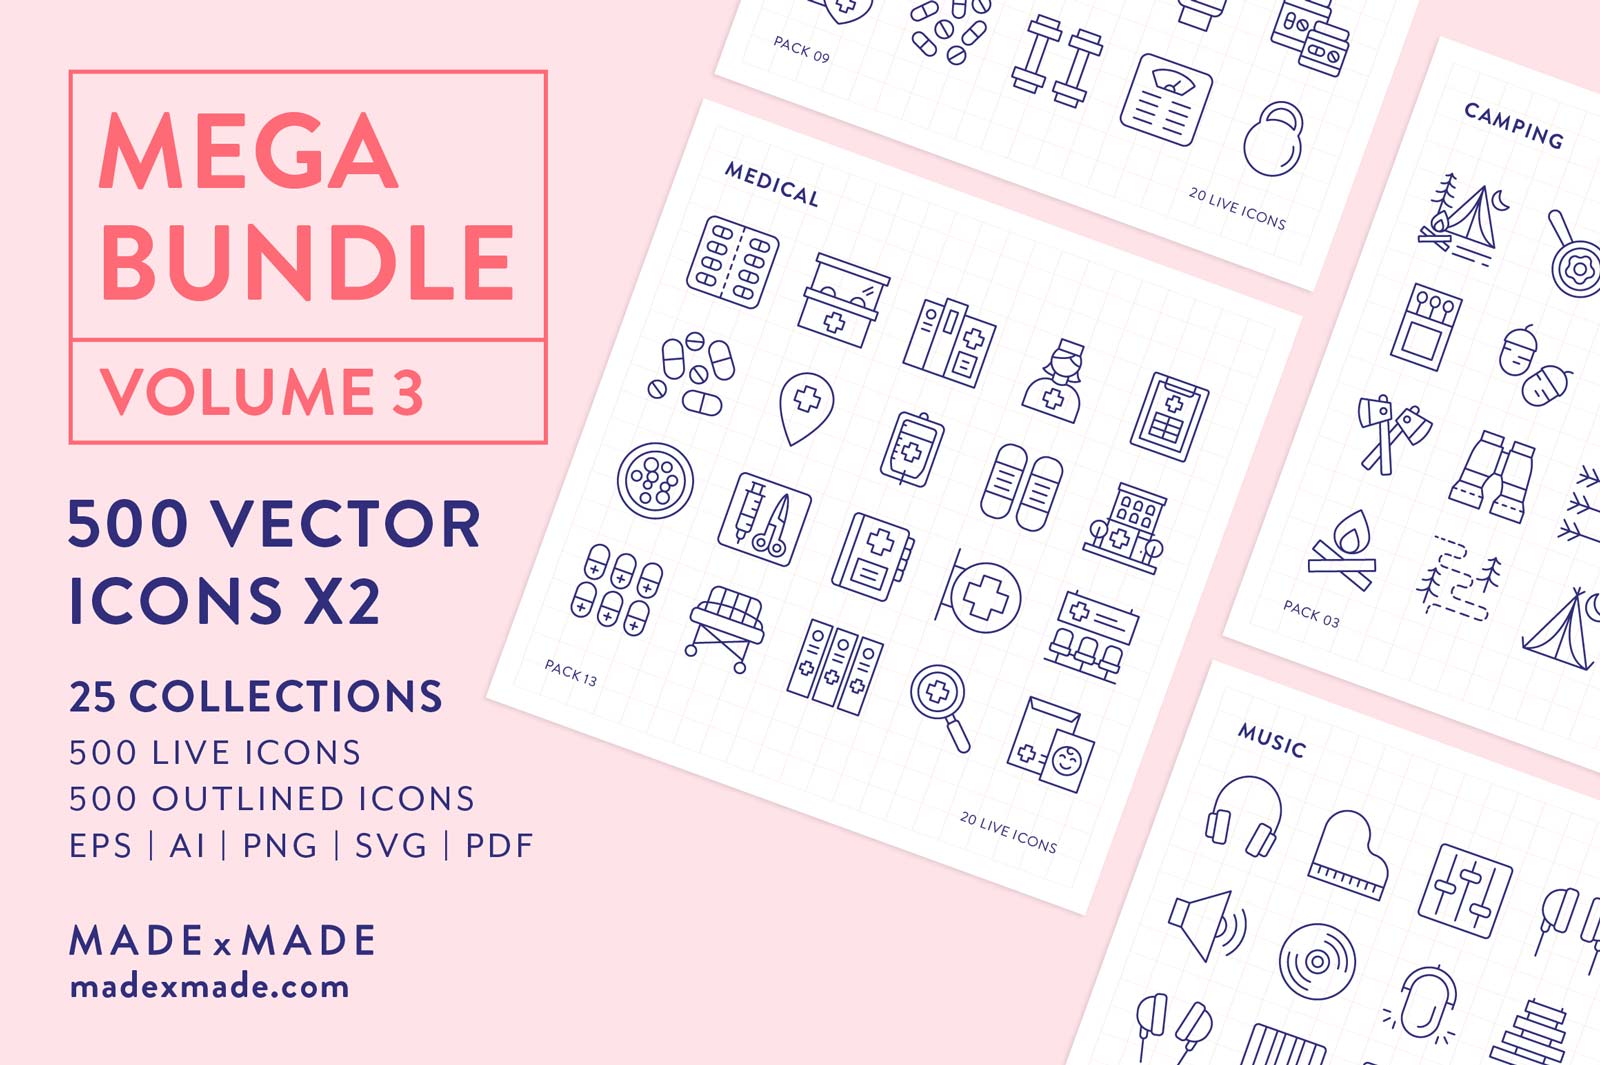 made x made icons – Mega Bundle Vol 3 Vector Icons – High quality icon sets for designers, including downloadable icons and symbols from 25 popular collections